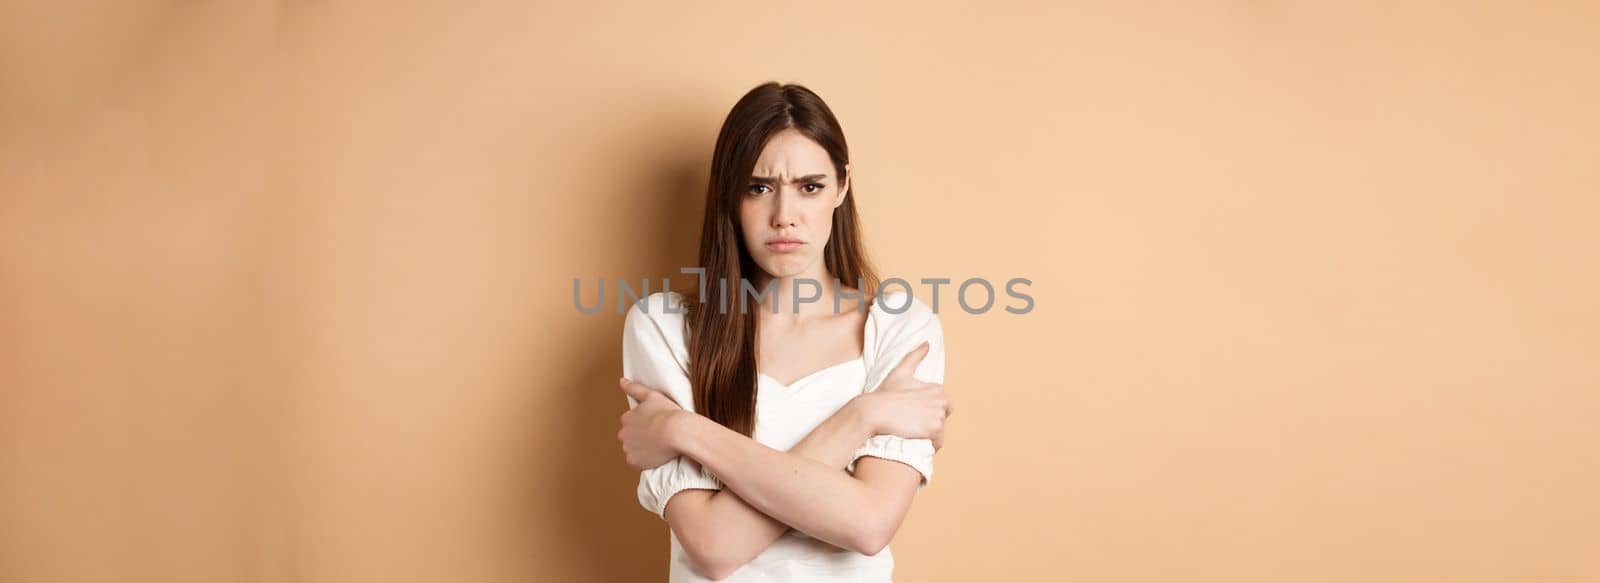 Offended woman hugging herself and frowning upset, feeling timid and defensive, standing on beige background.